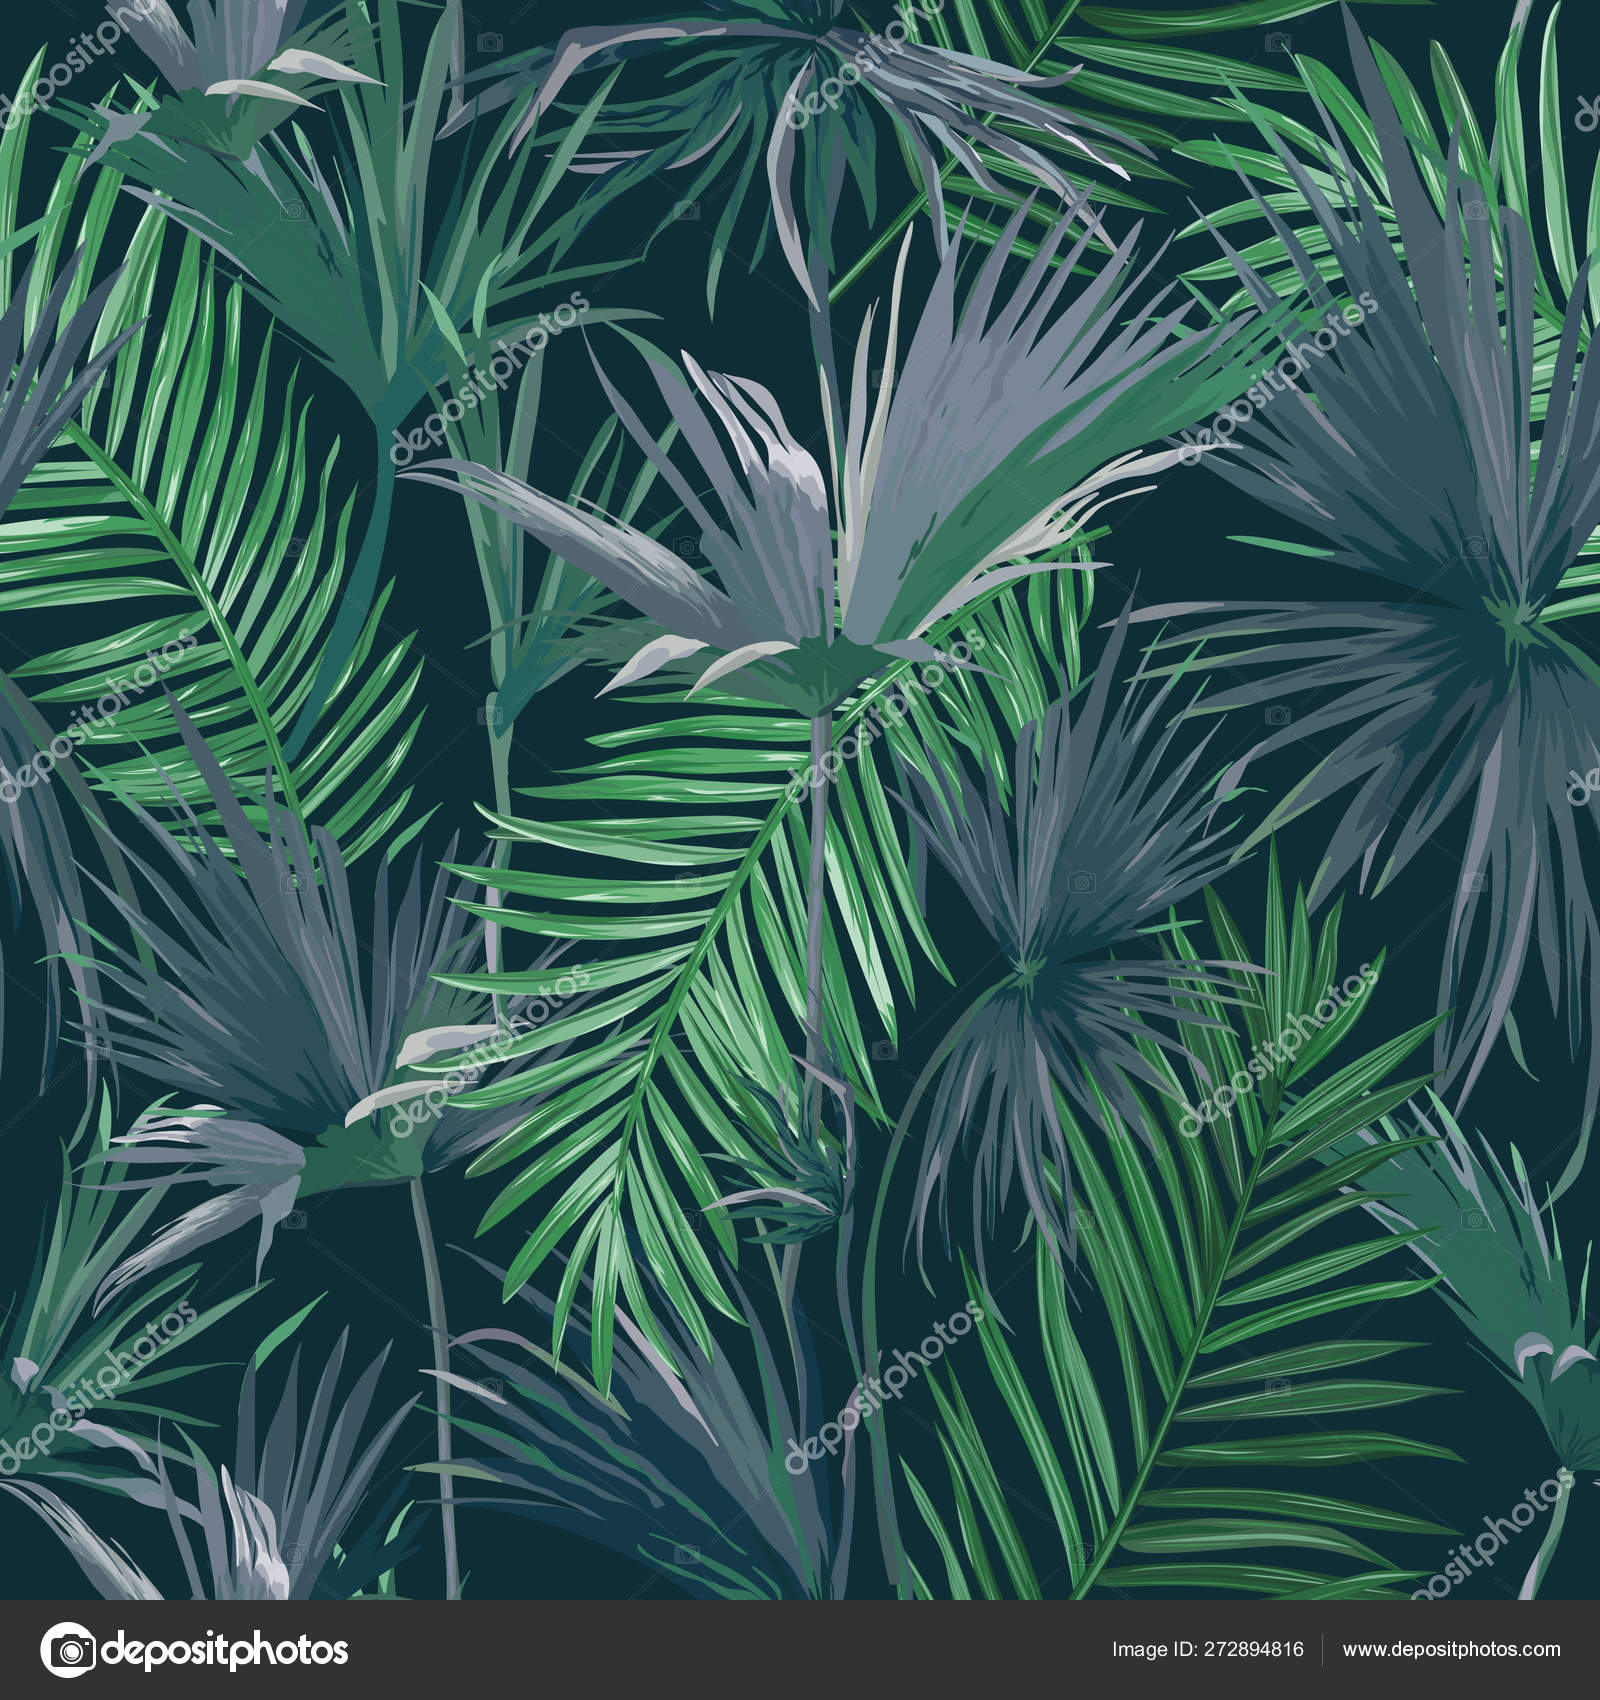 Tropical Jungle Palm Leaves Seamless Background Vector Floral Pattern Illustration For Wallpaper Print Design Textile Template Vector Image By C Woodhouse Vector Stock